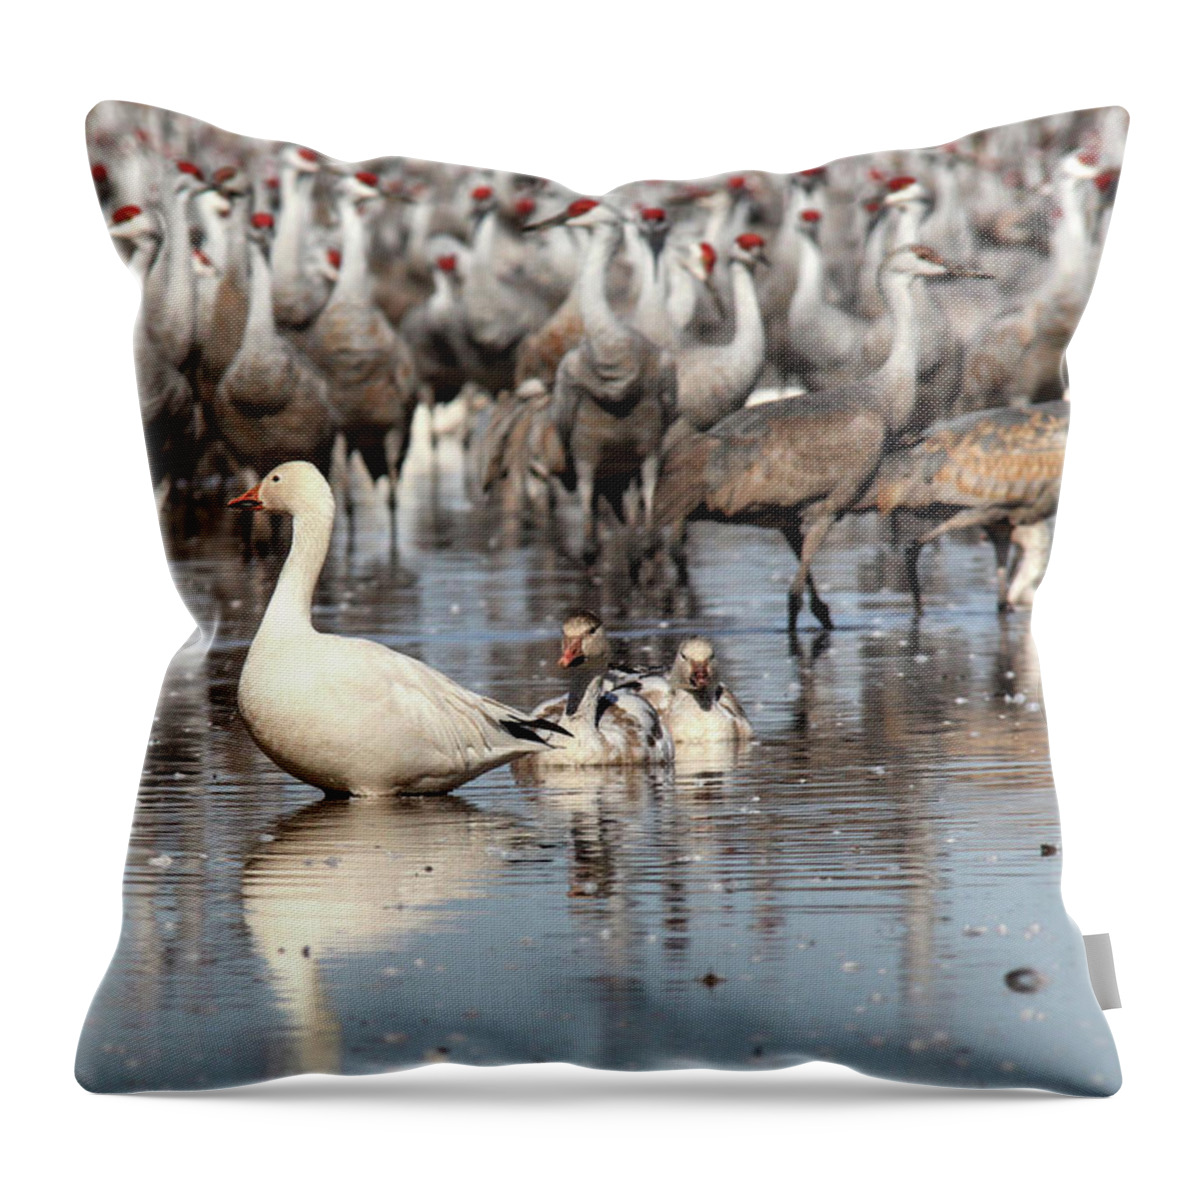 Wildlife Throw Pillow featuring the photograph In Front of Giants by Robert Harris